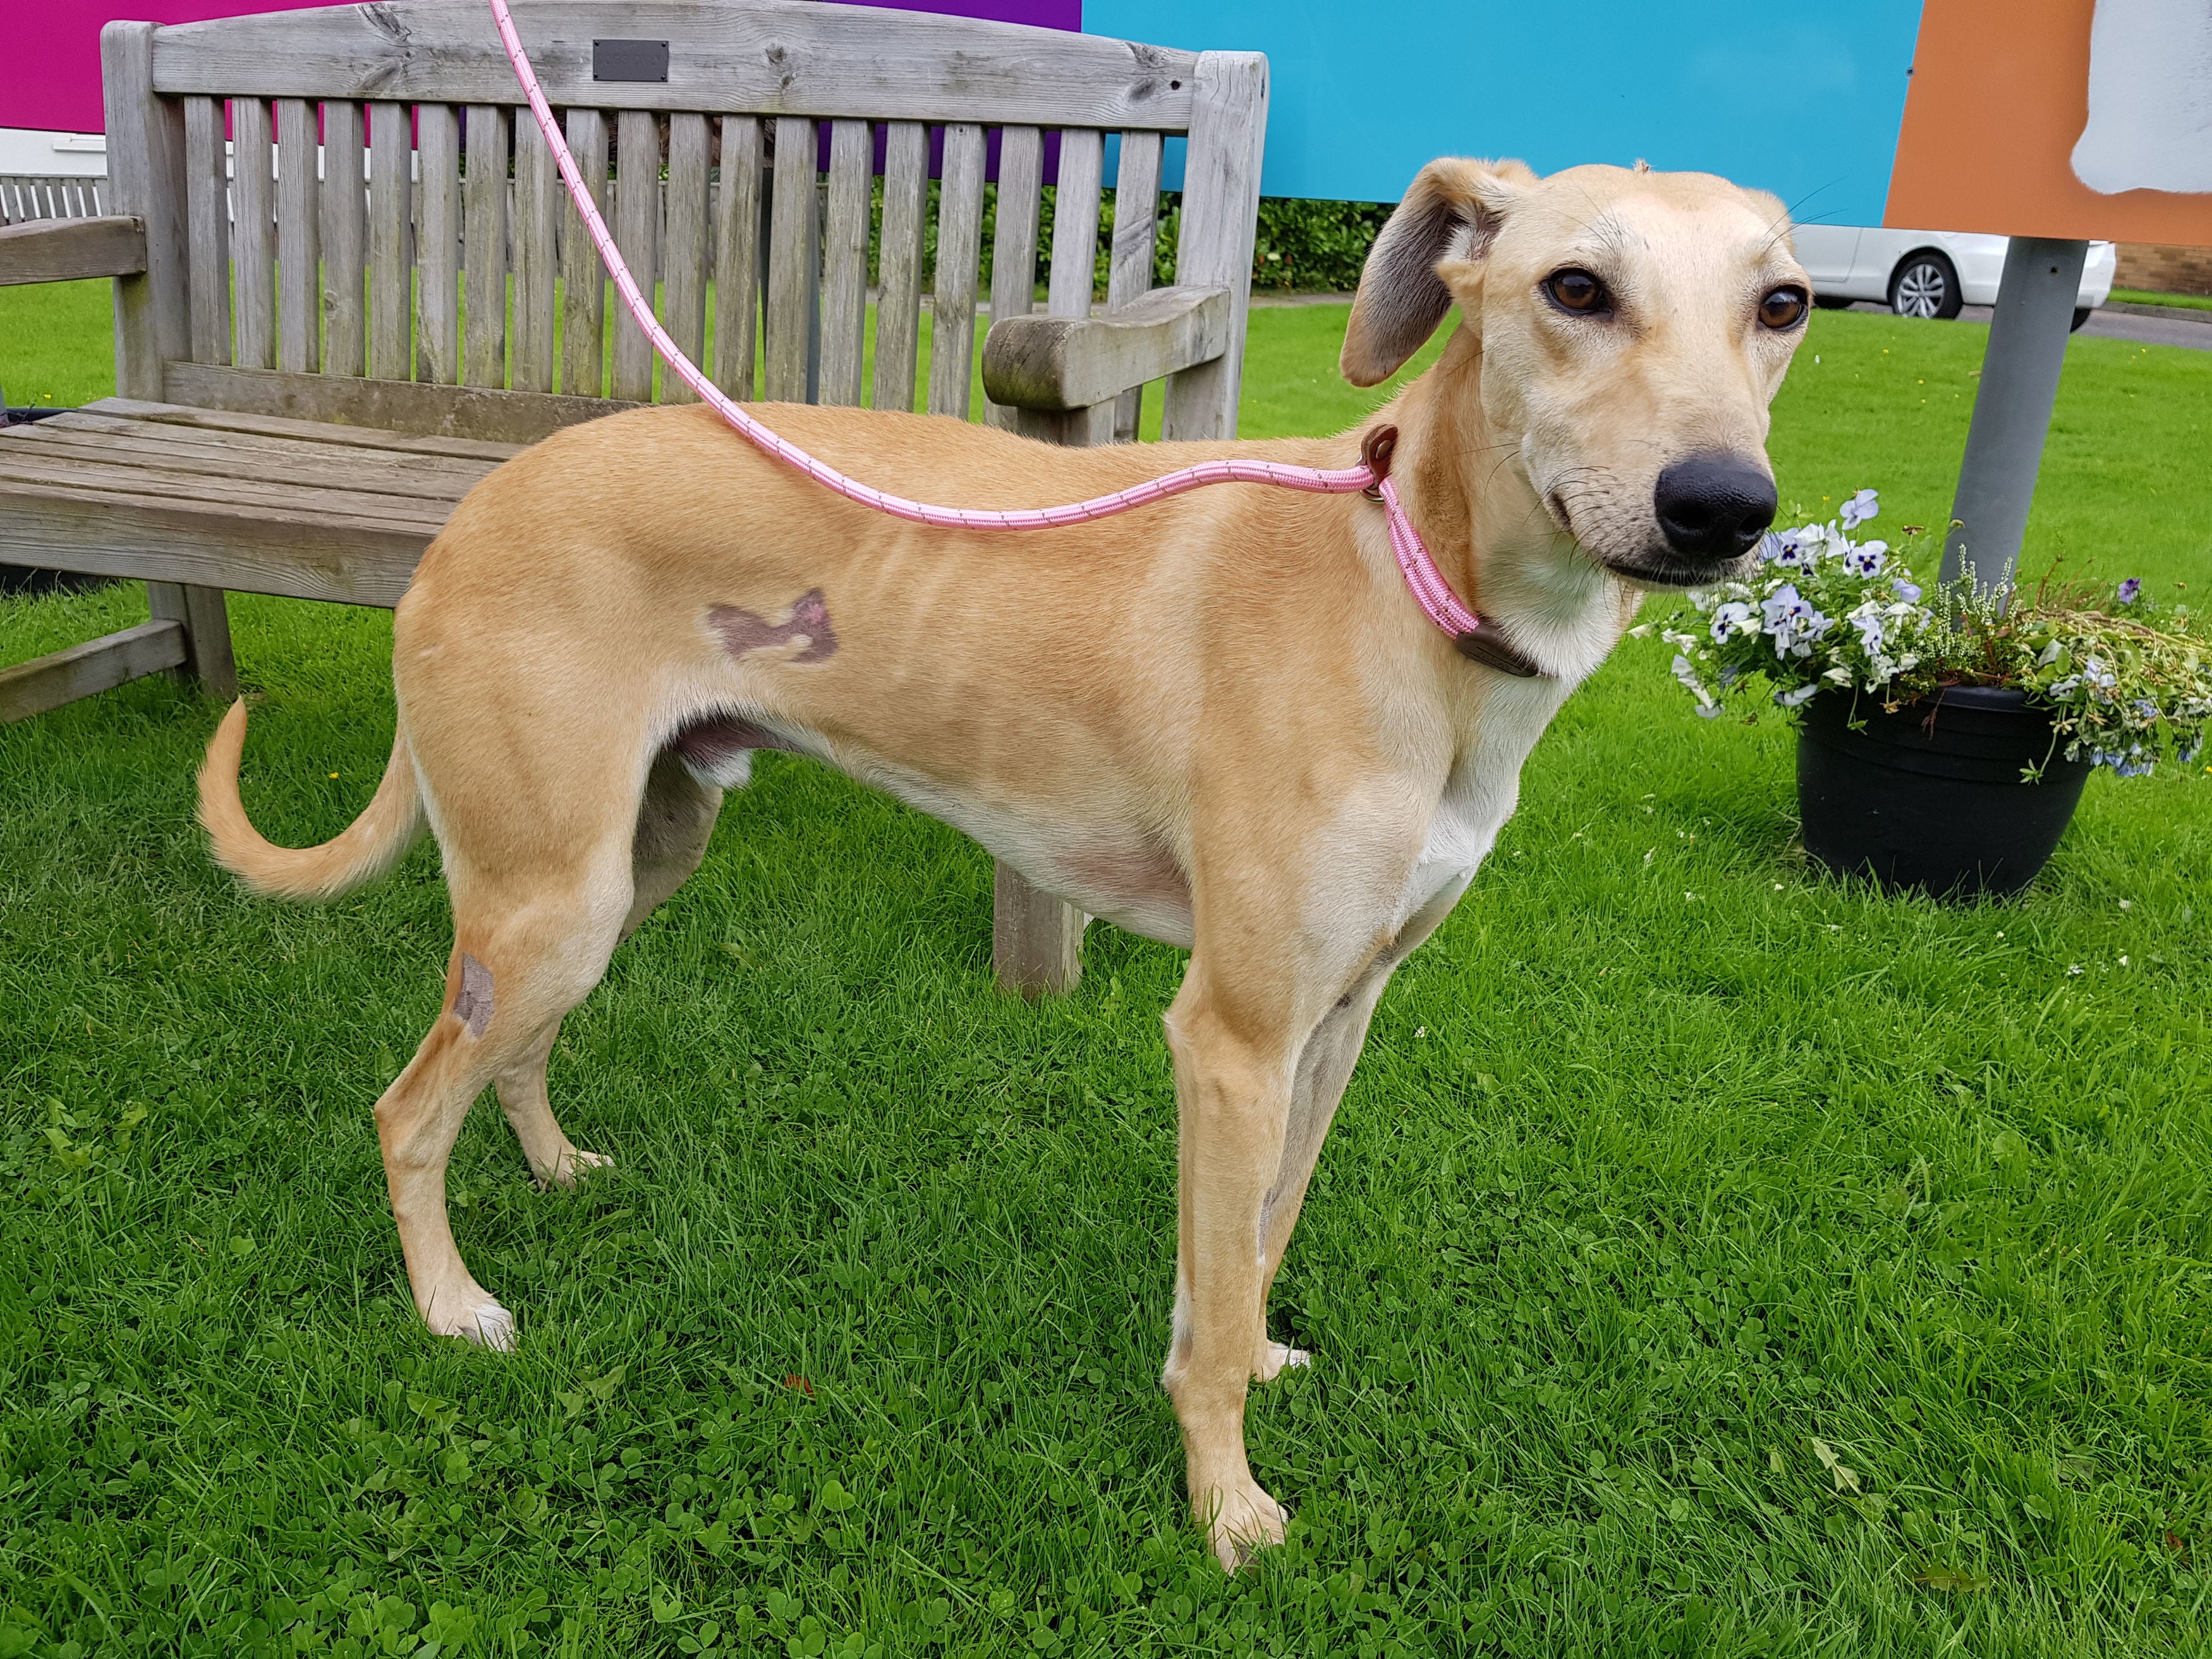 Ashton the lurcher, who was found with more than 60 wounds from a pellet gun in North Lanarkshire